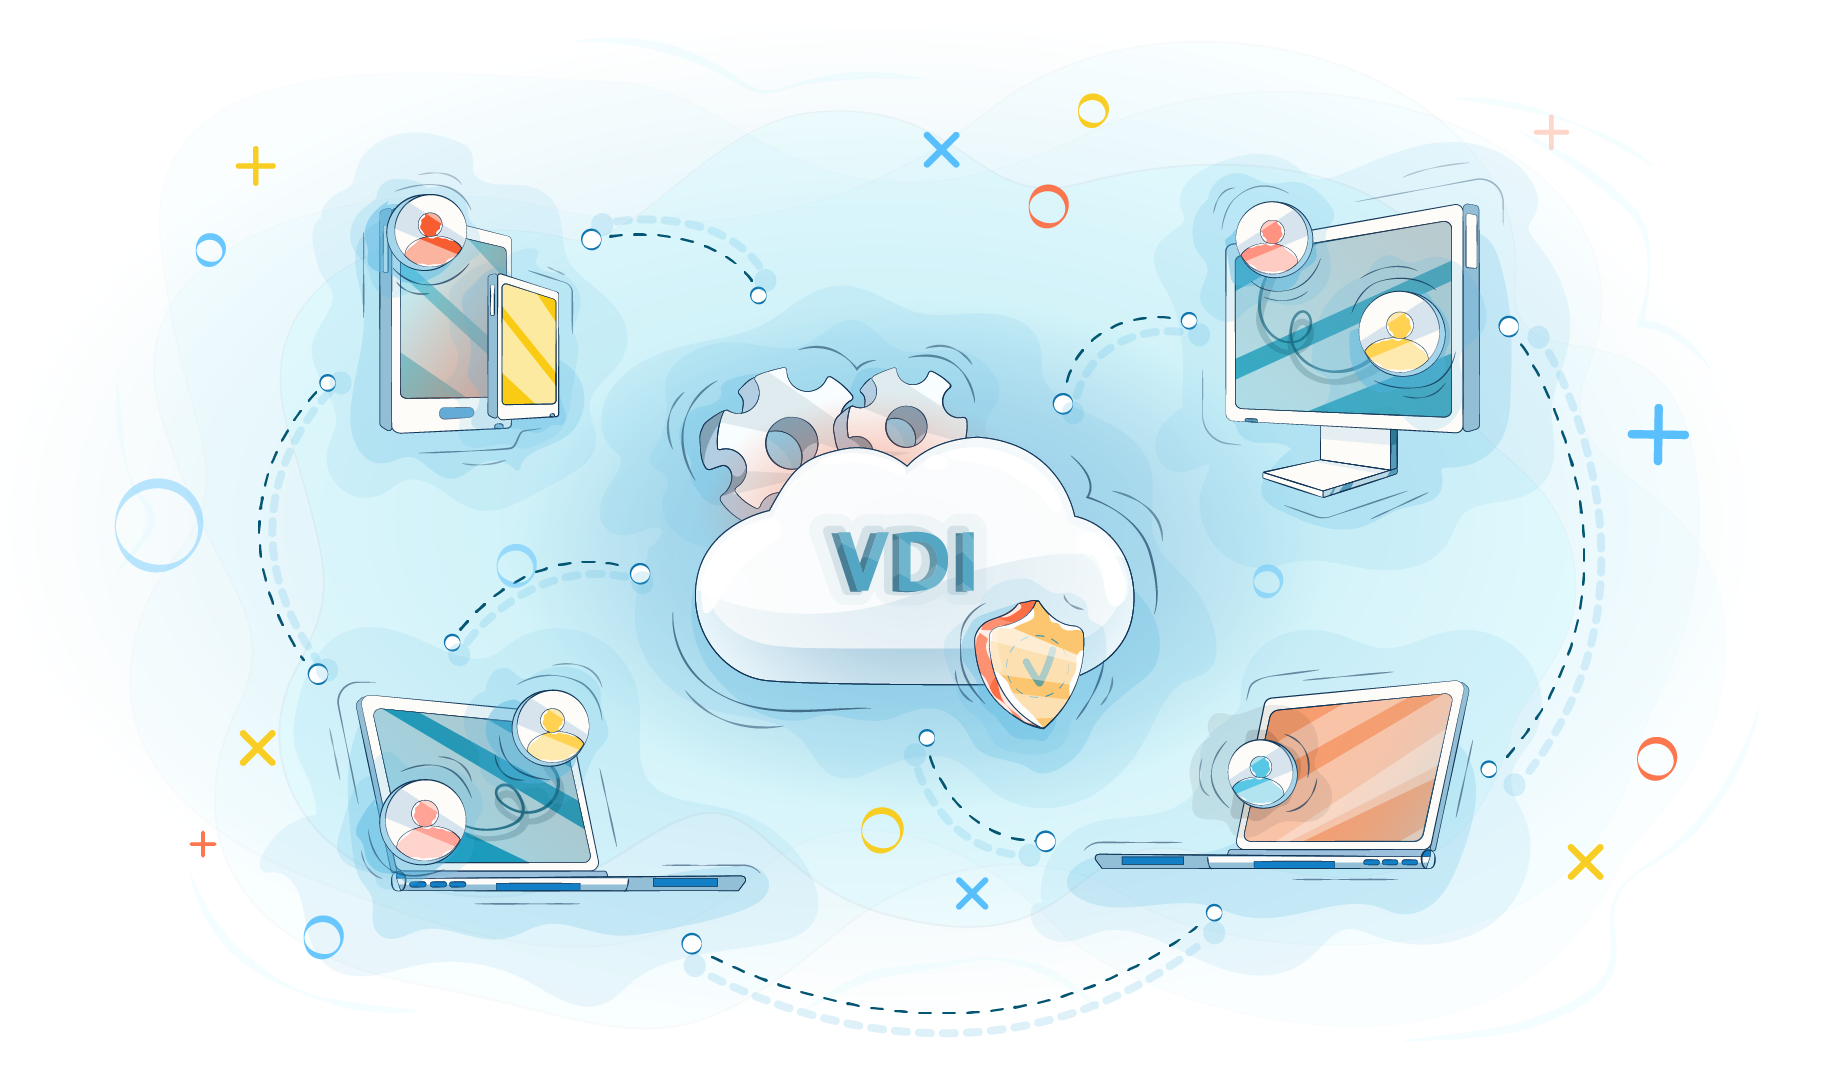 The advantages of virtualization of workstations with the help of VDI technology